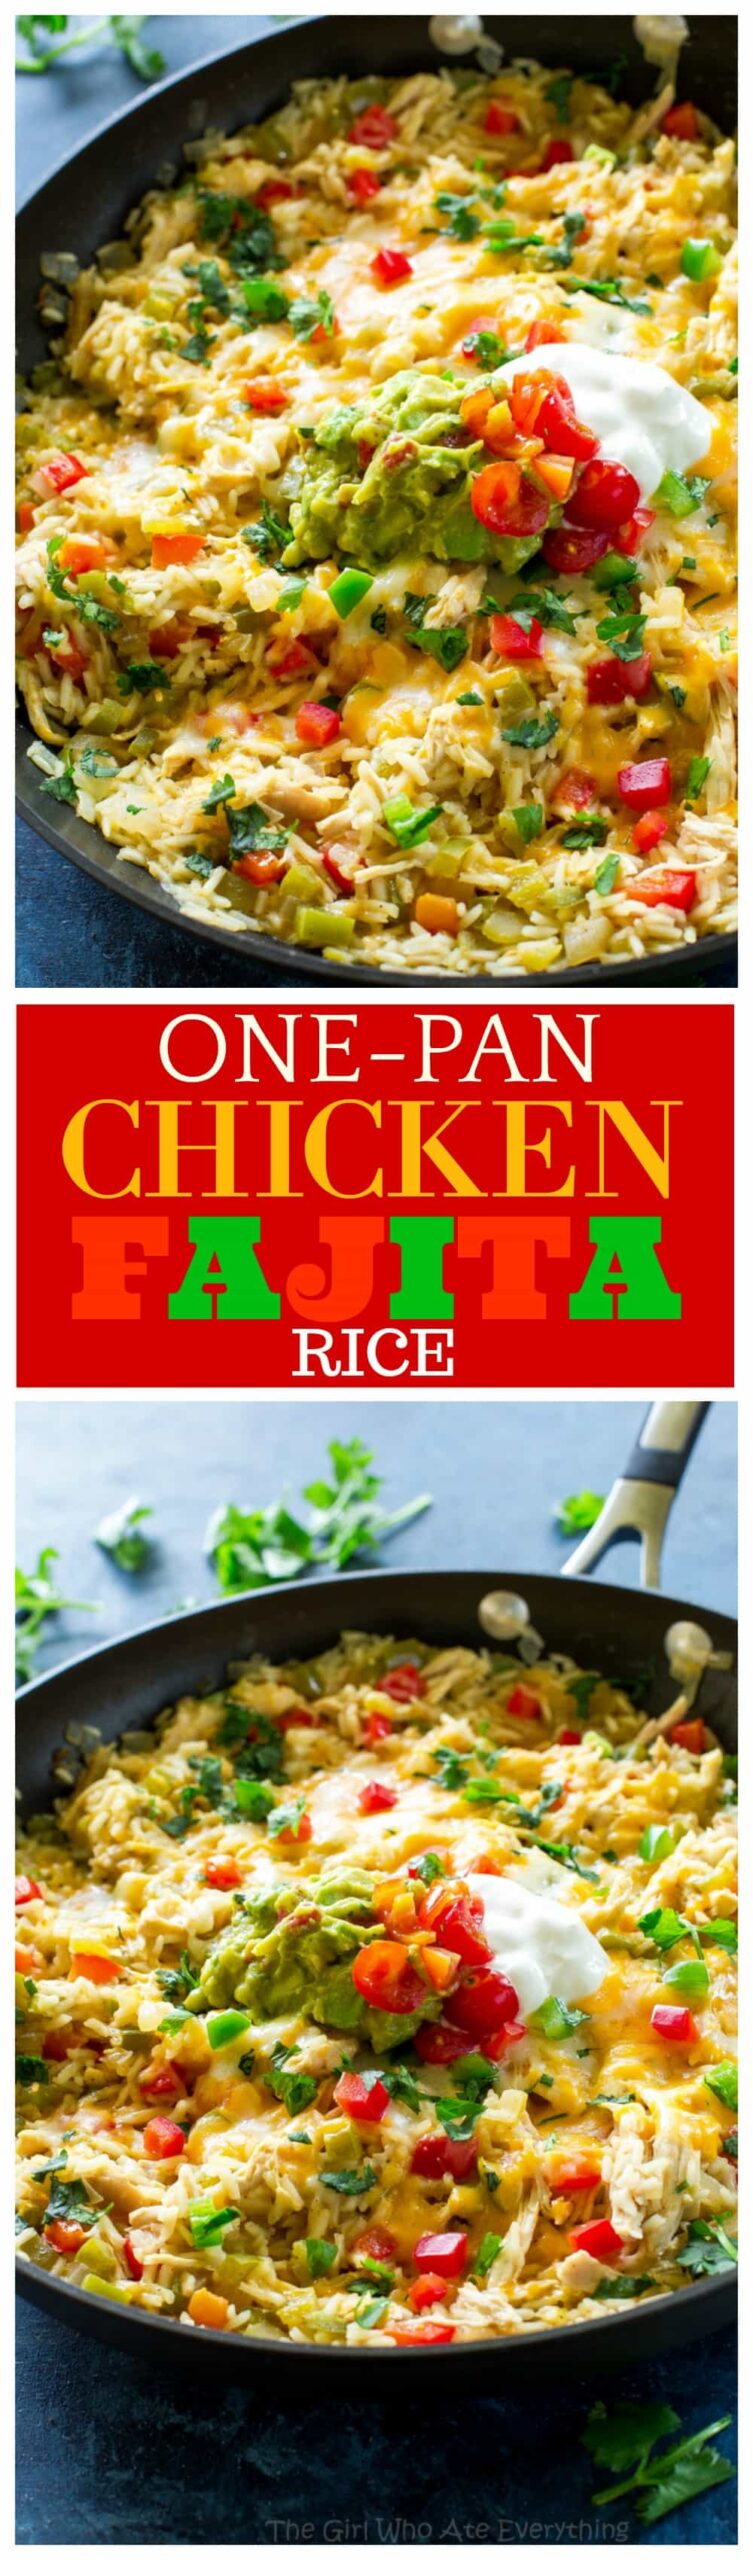 One-Pan Chicken Fajita Rice - an easy Mexican dinner read in under 30 minutes. #onepan #chicken #rice #skillet #mexican #easydinner